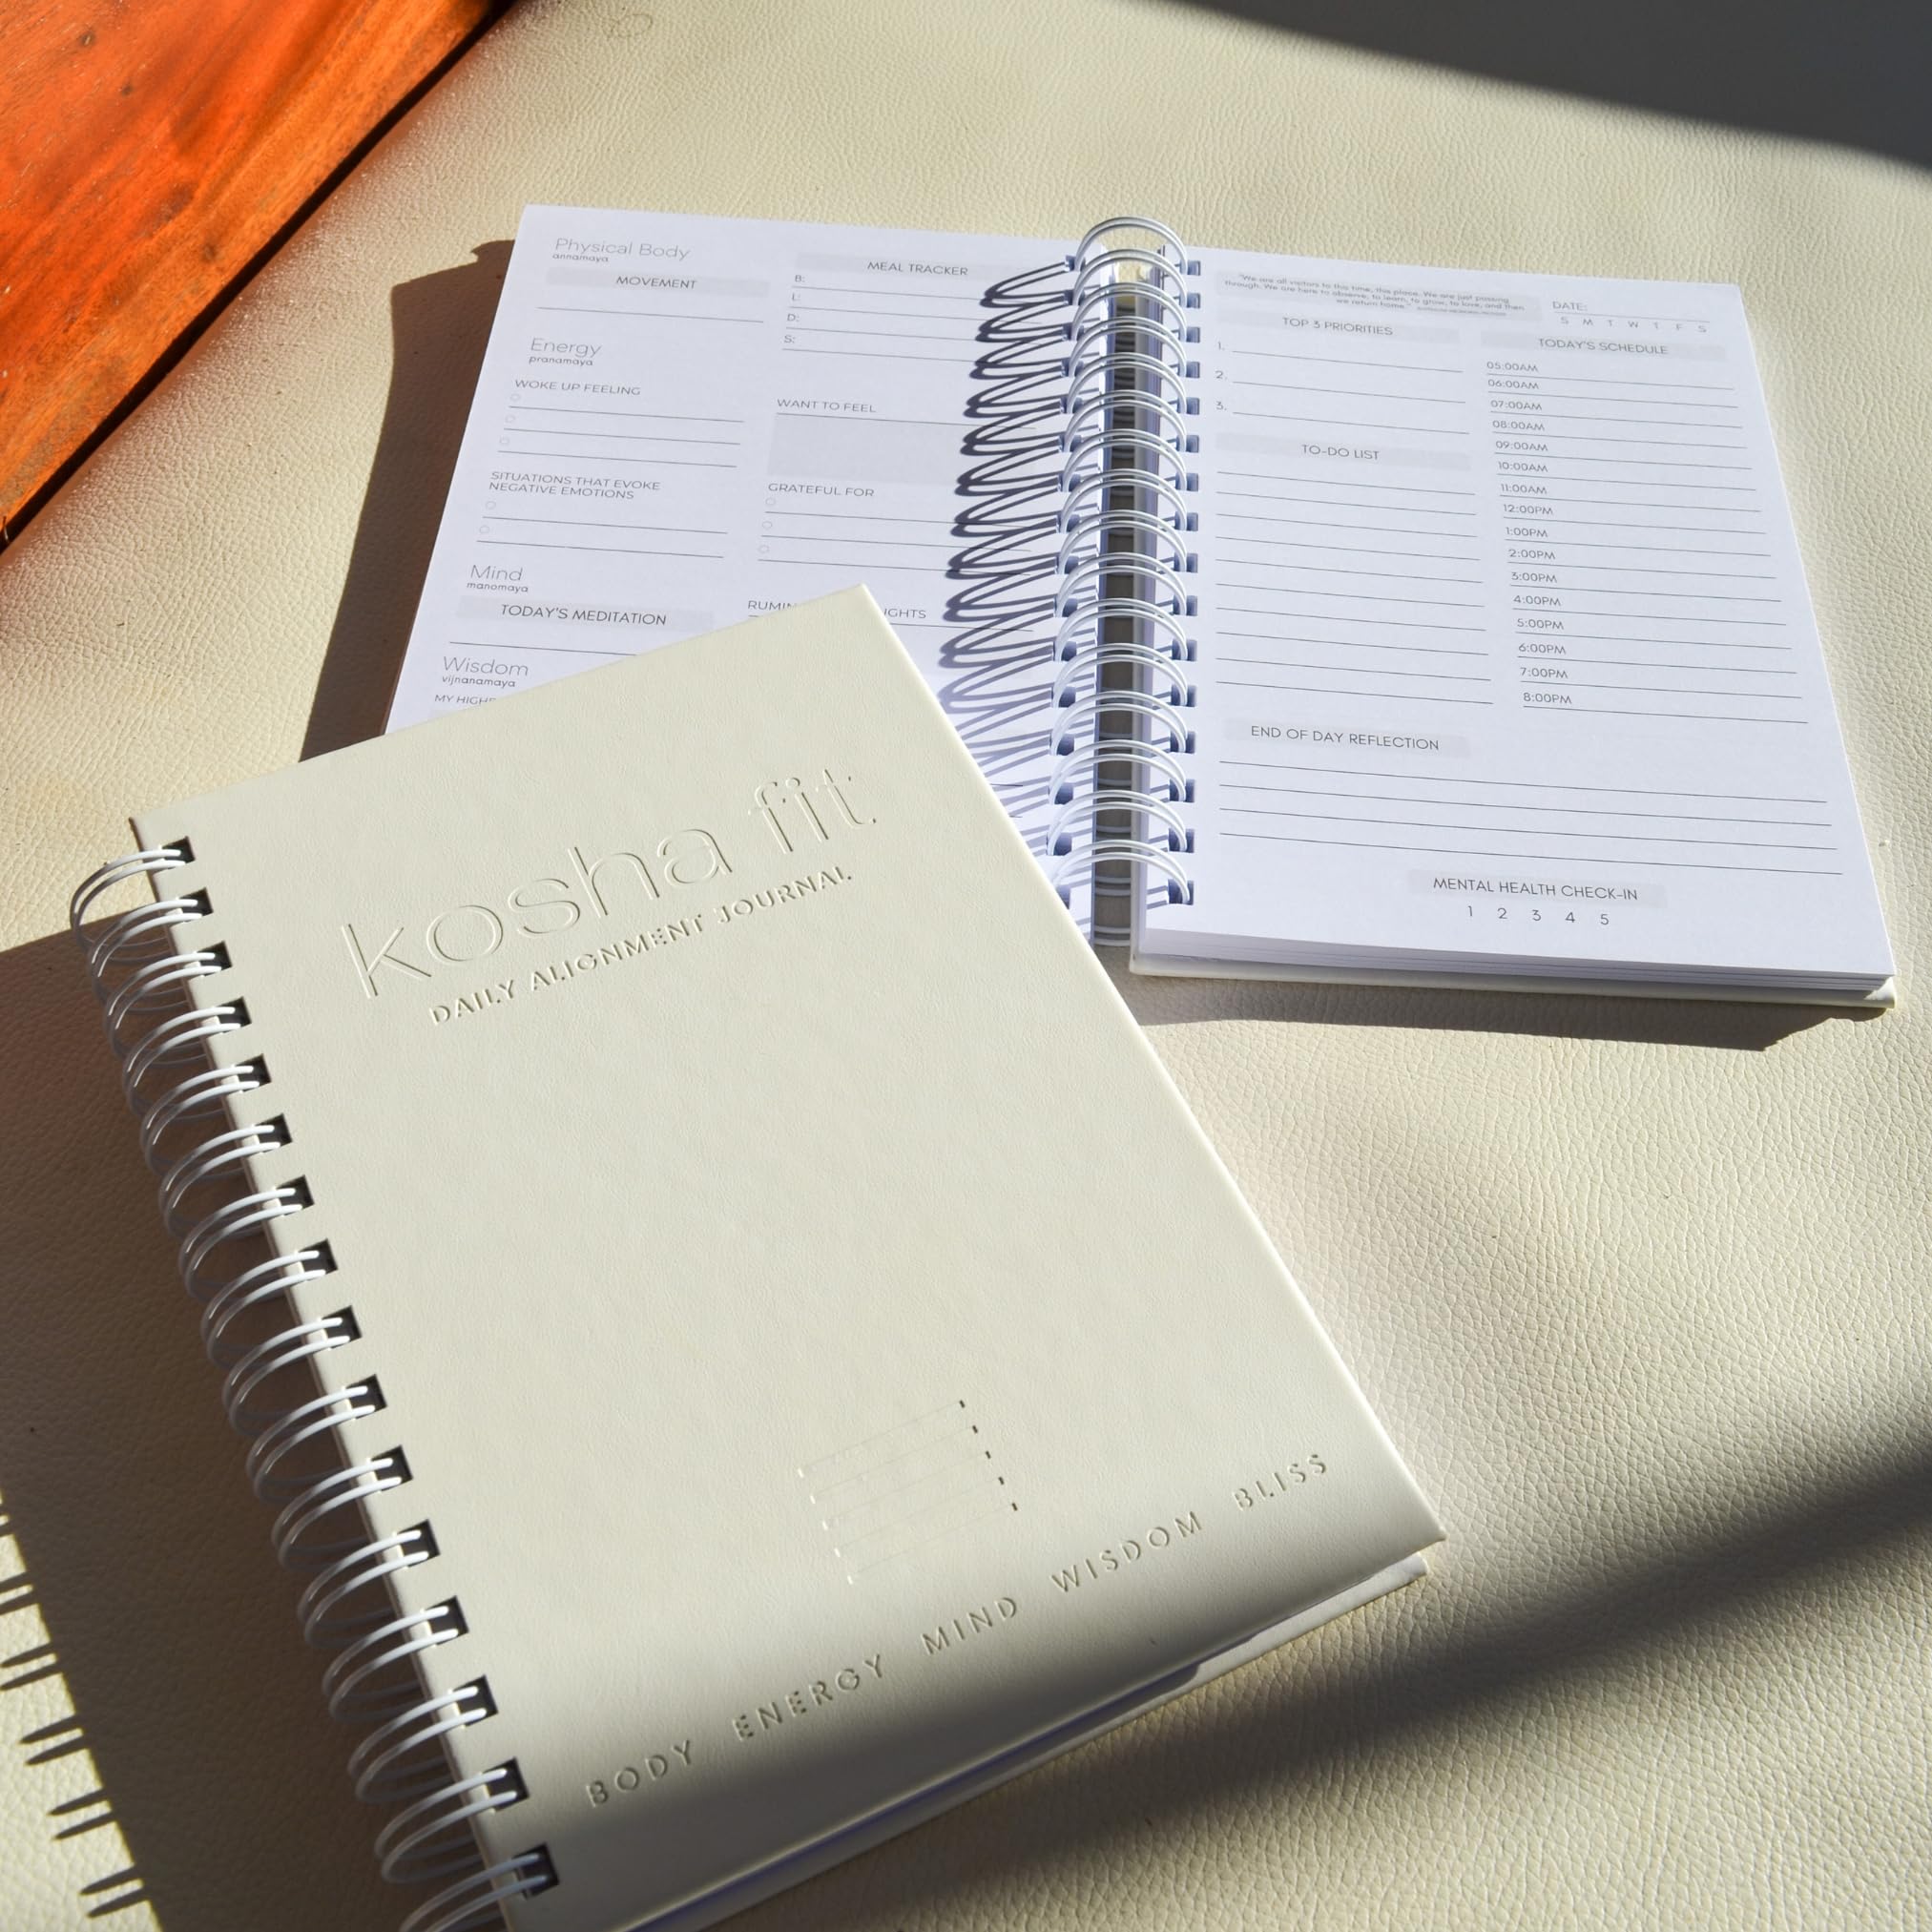 Daily Alignment Journal: Habit Tracker, Mindfulness Journal, Hourly Planner | Happiness & Productivity | Undated Hardcover Spiral Planner, White Journal for Mental Health - Wellness Gift Ideas